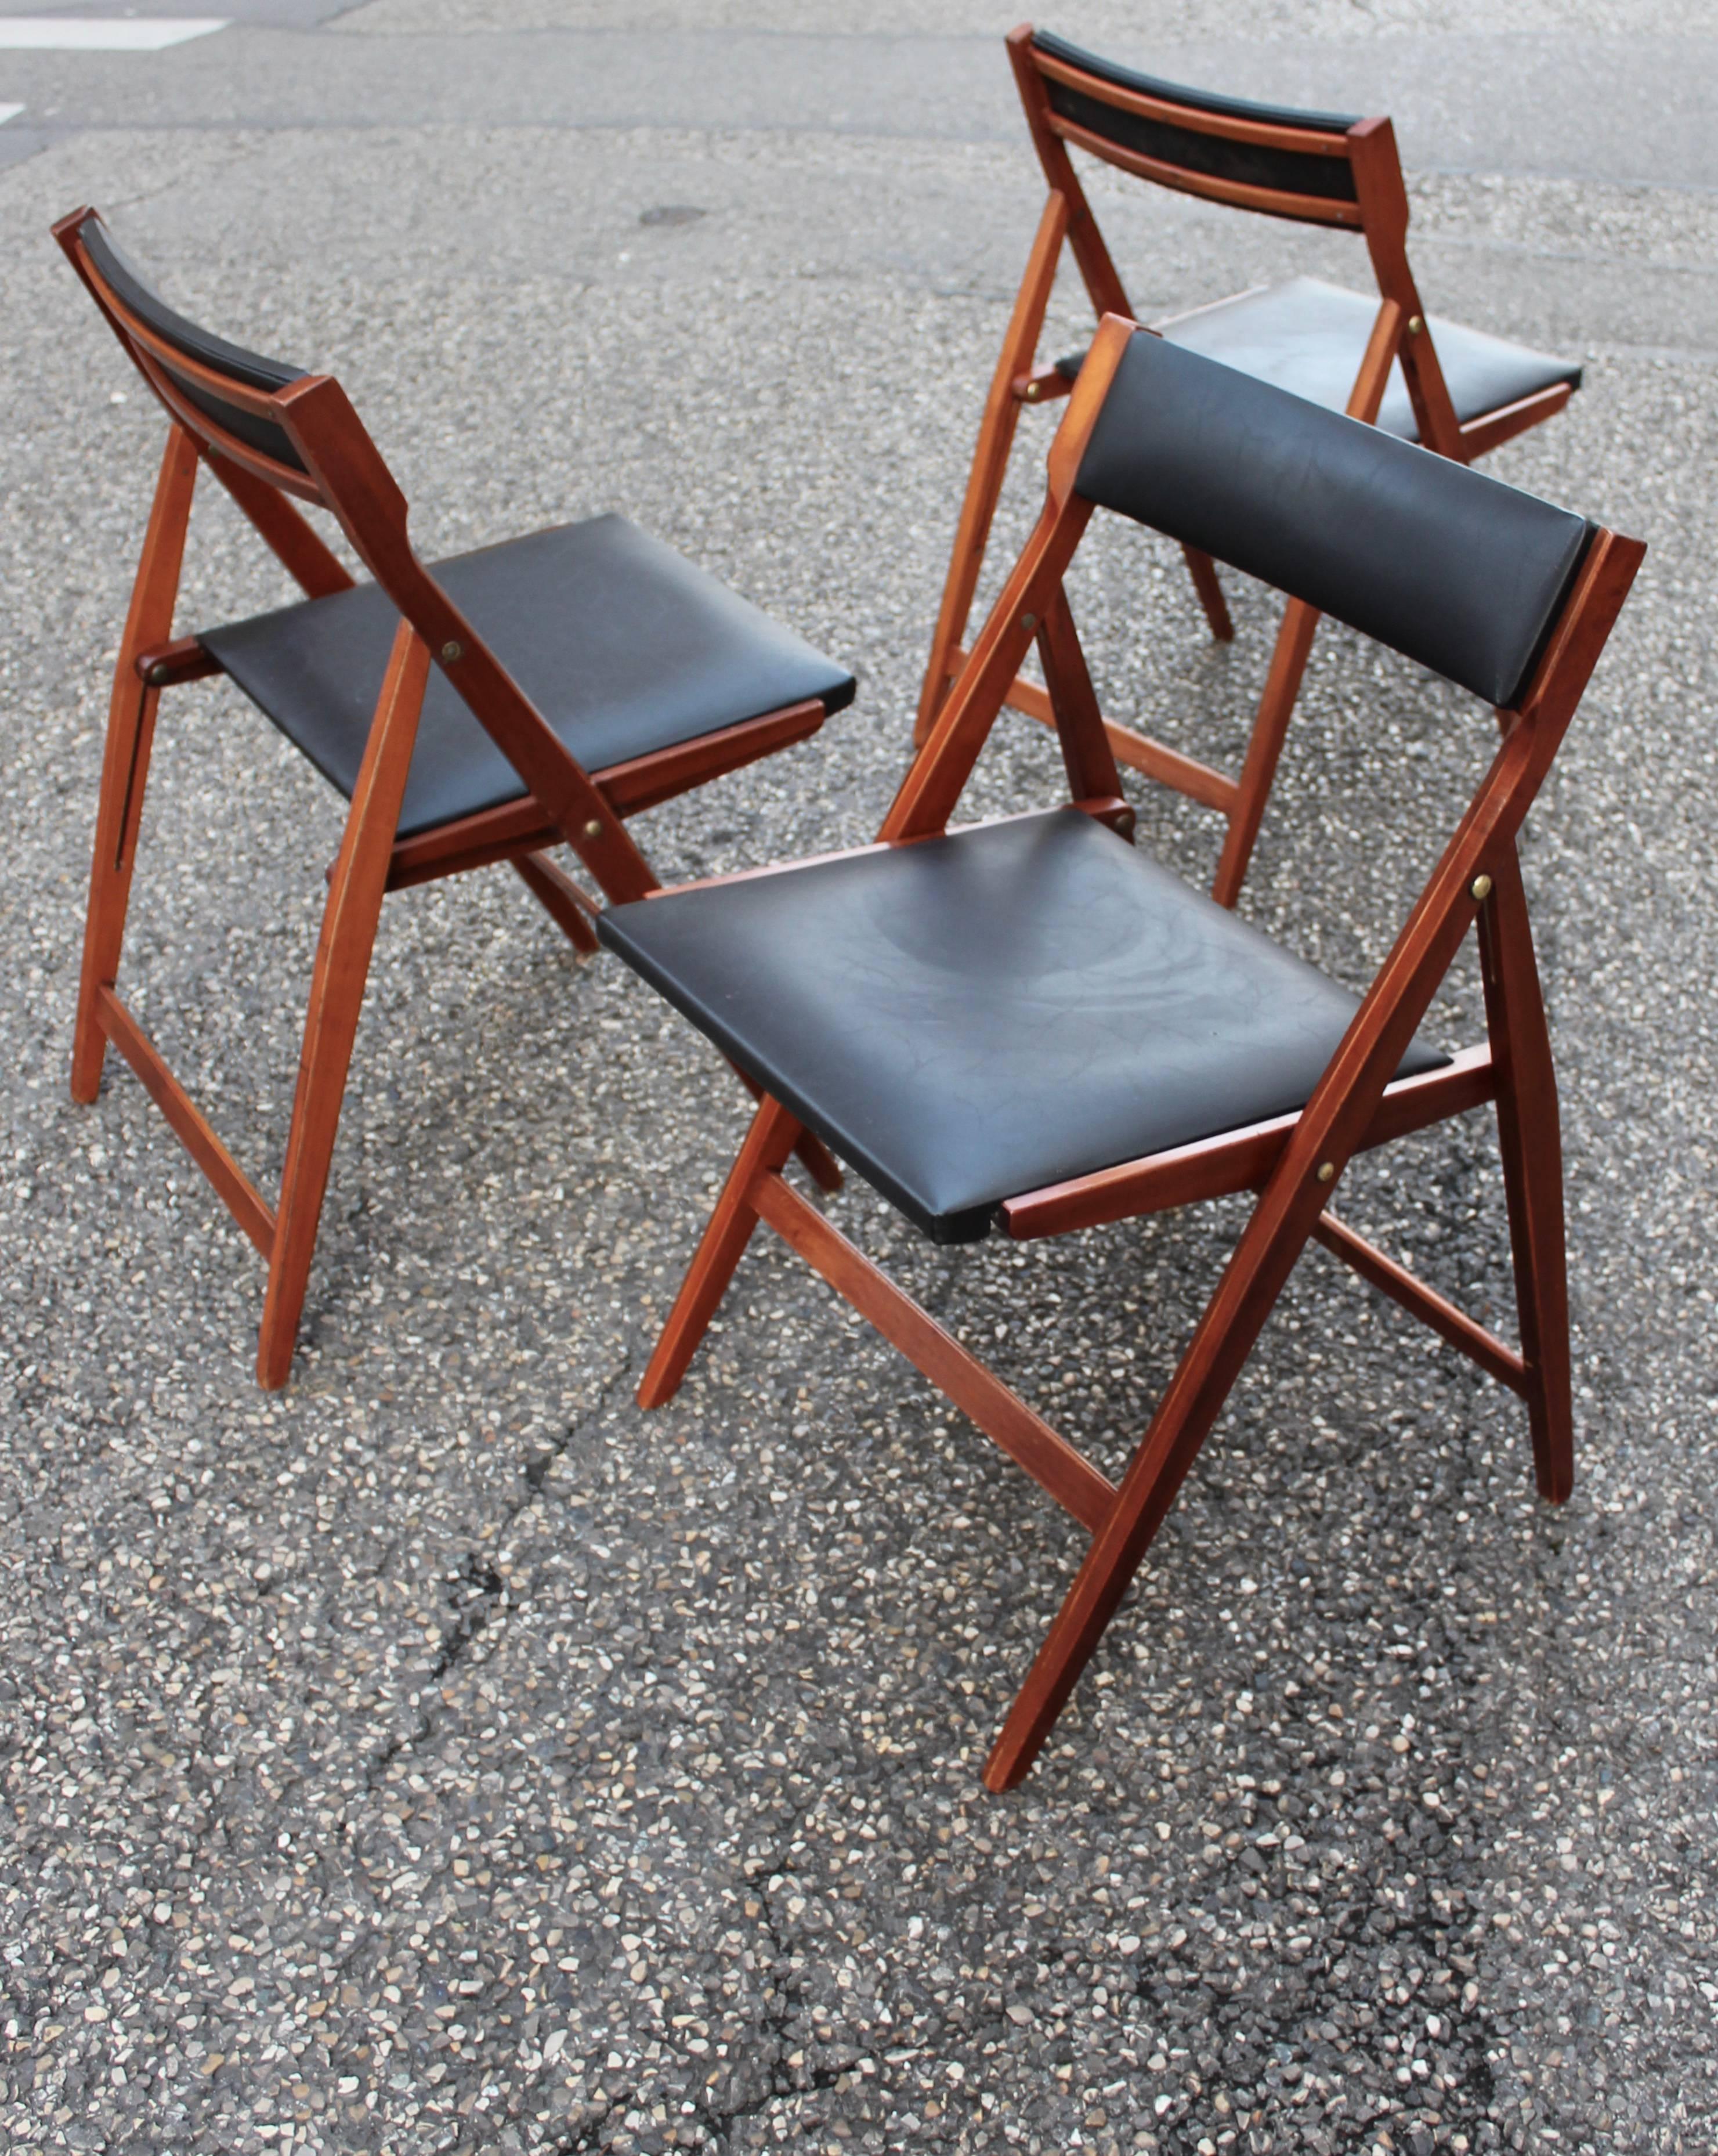 Gio Ponti a set of three Eden folding chairs, model 320, 1955 in perfect condition
folding chairs in mahogany and synthetic leather with fabric stamp.